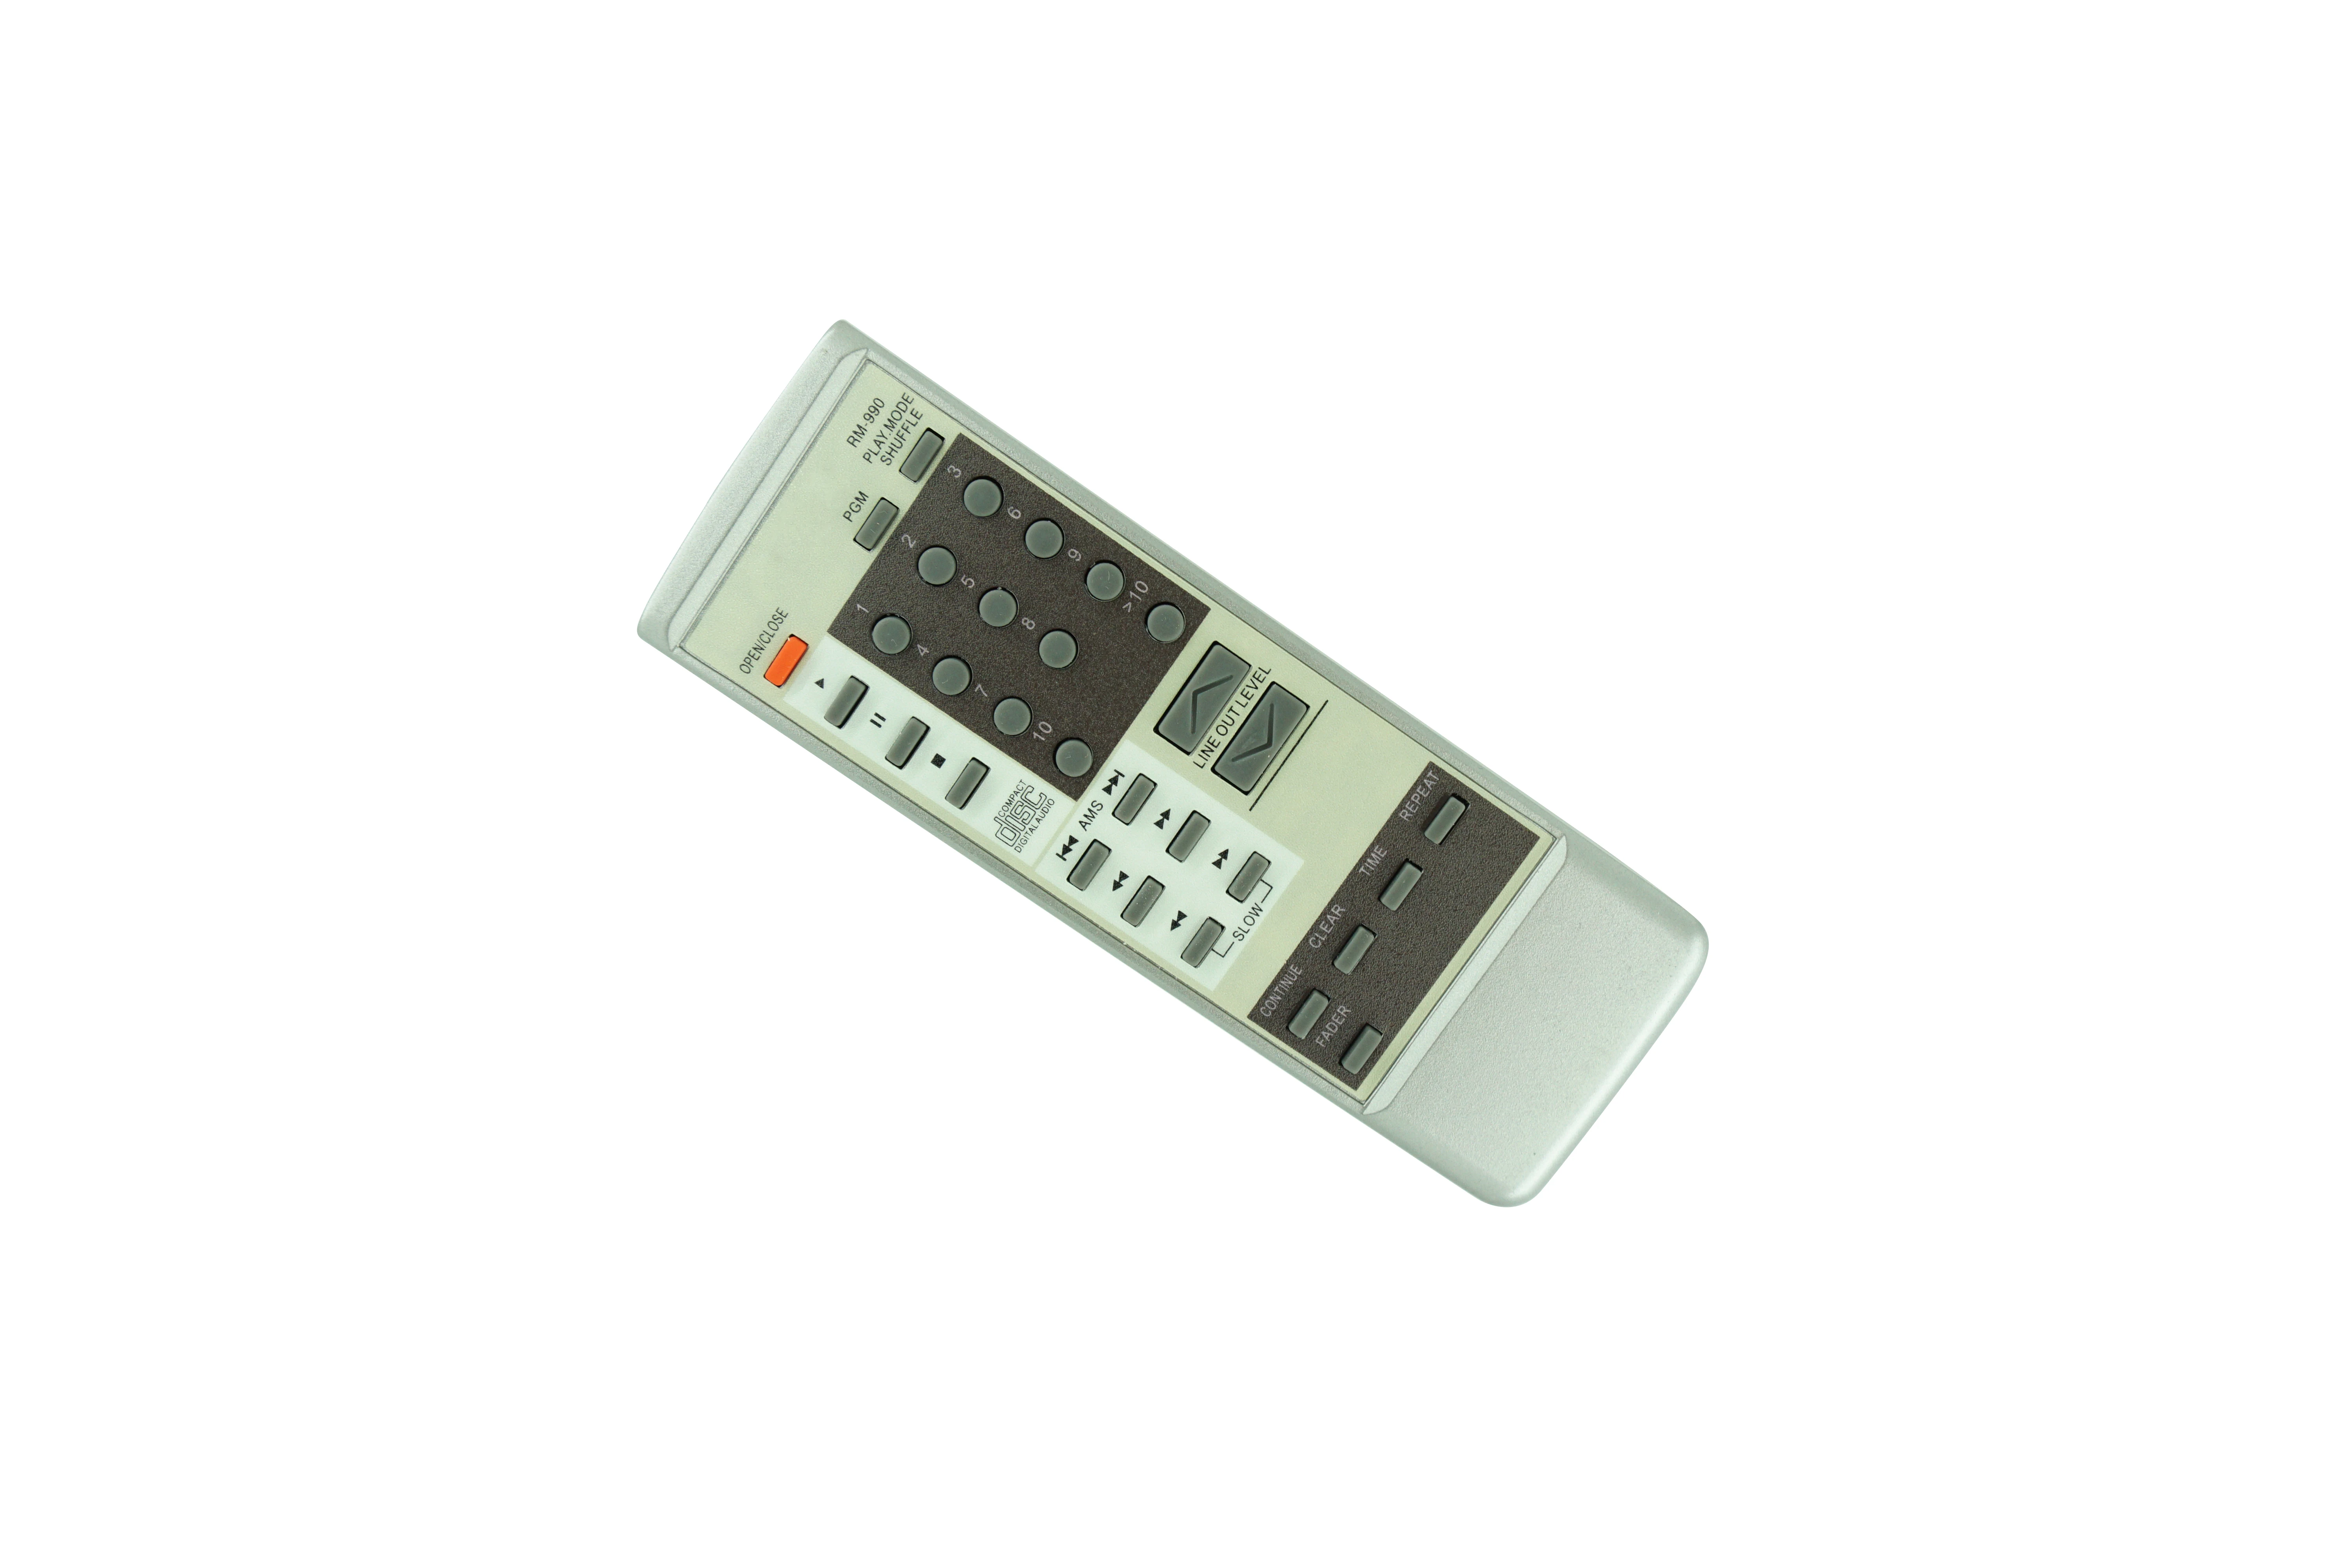 

Remote Control For Sony RM-D195 CDP-P79 CDP-S39 CDP-S42 CDP-S41 RM-D591 CDP-591 RM-D597 RM-D297 CDP-M54 Compact Disc CD Player